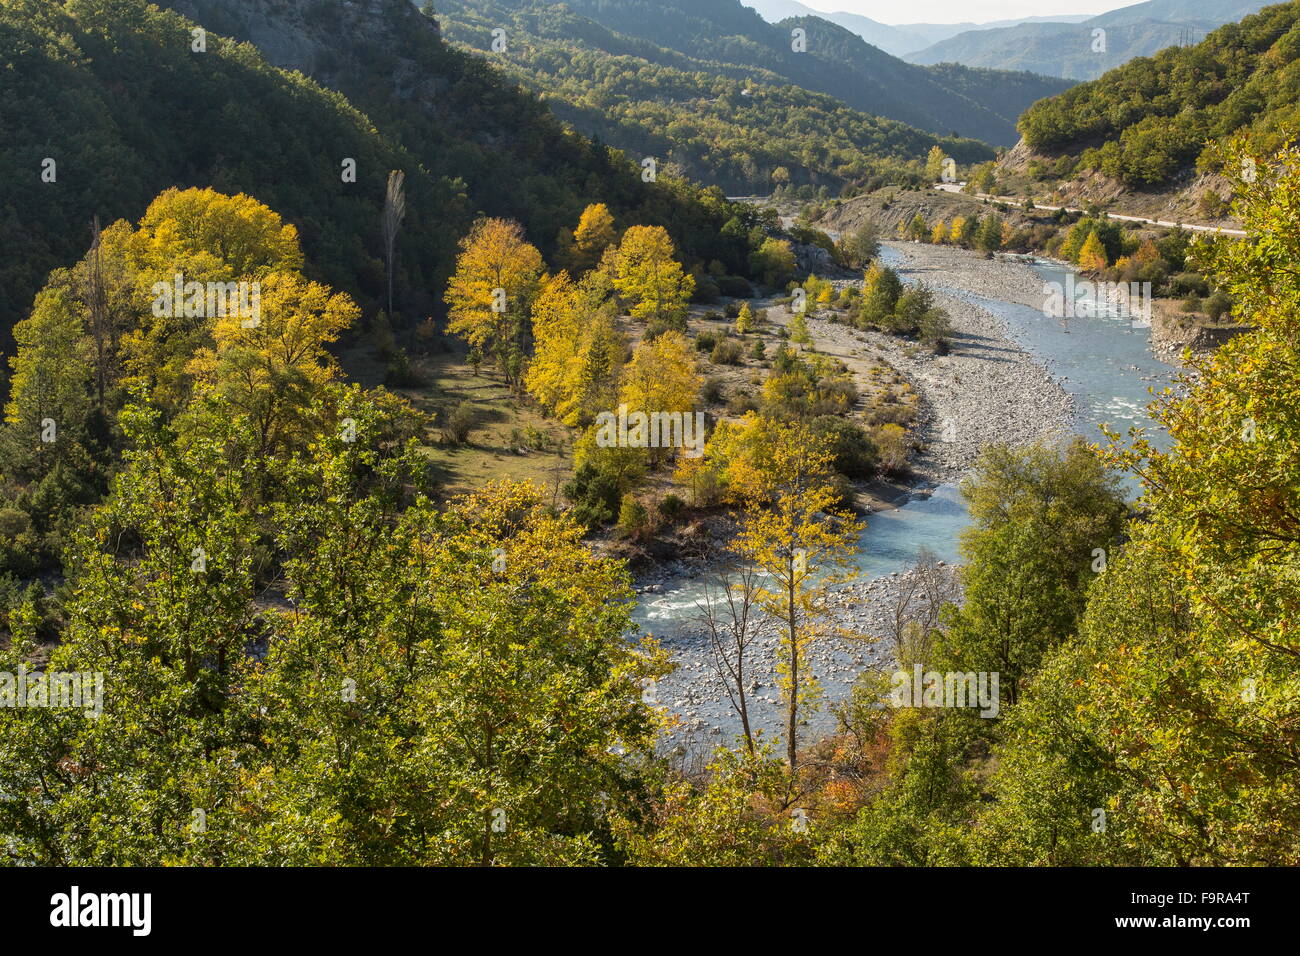 Autumn colour in the Sarantaporos valley (a tributary of the Aoös or Vjosë)  in the north Pindos near Kefalochori, Greece. Stock Photo